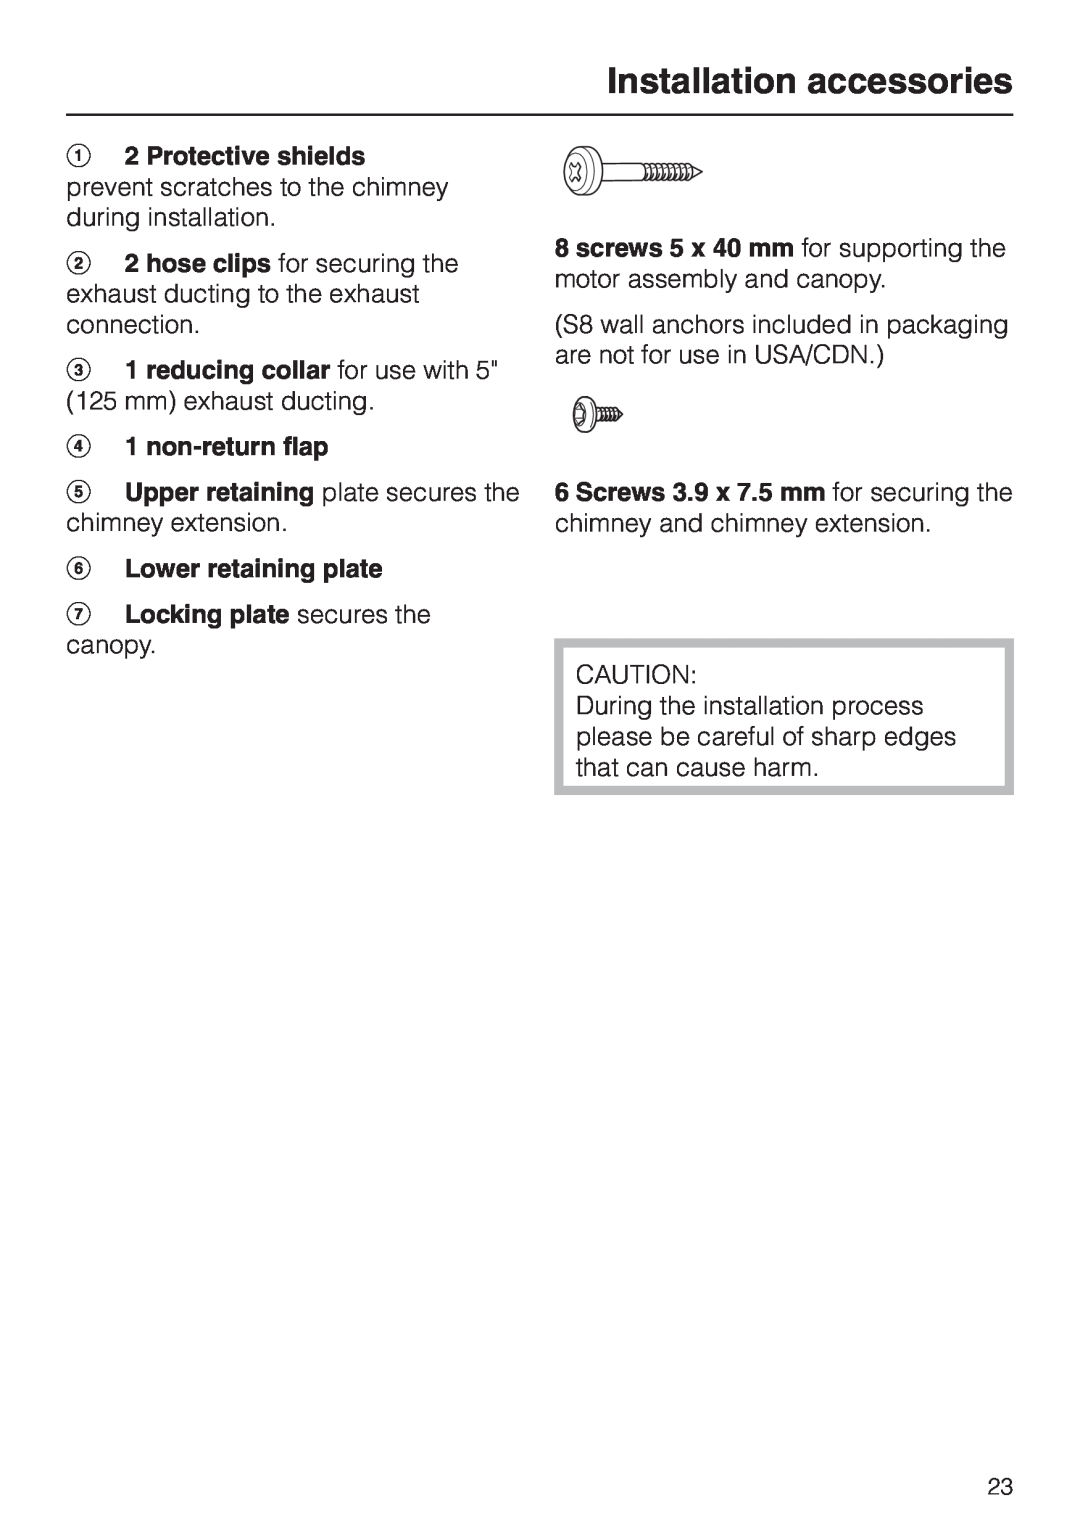 Miele DA239-3 installation instructions Installation accessories, c1 reducing collar for use with 